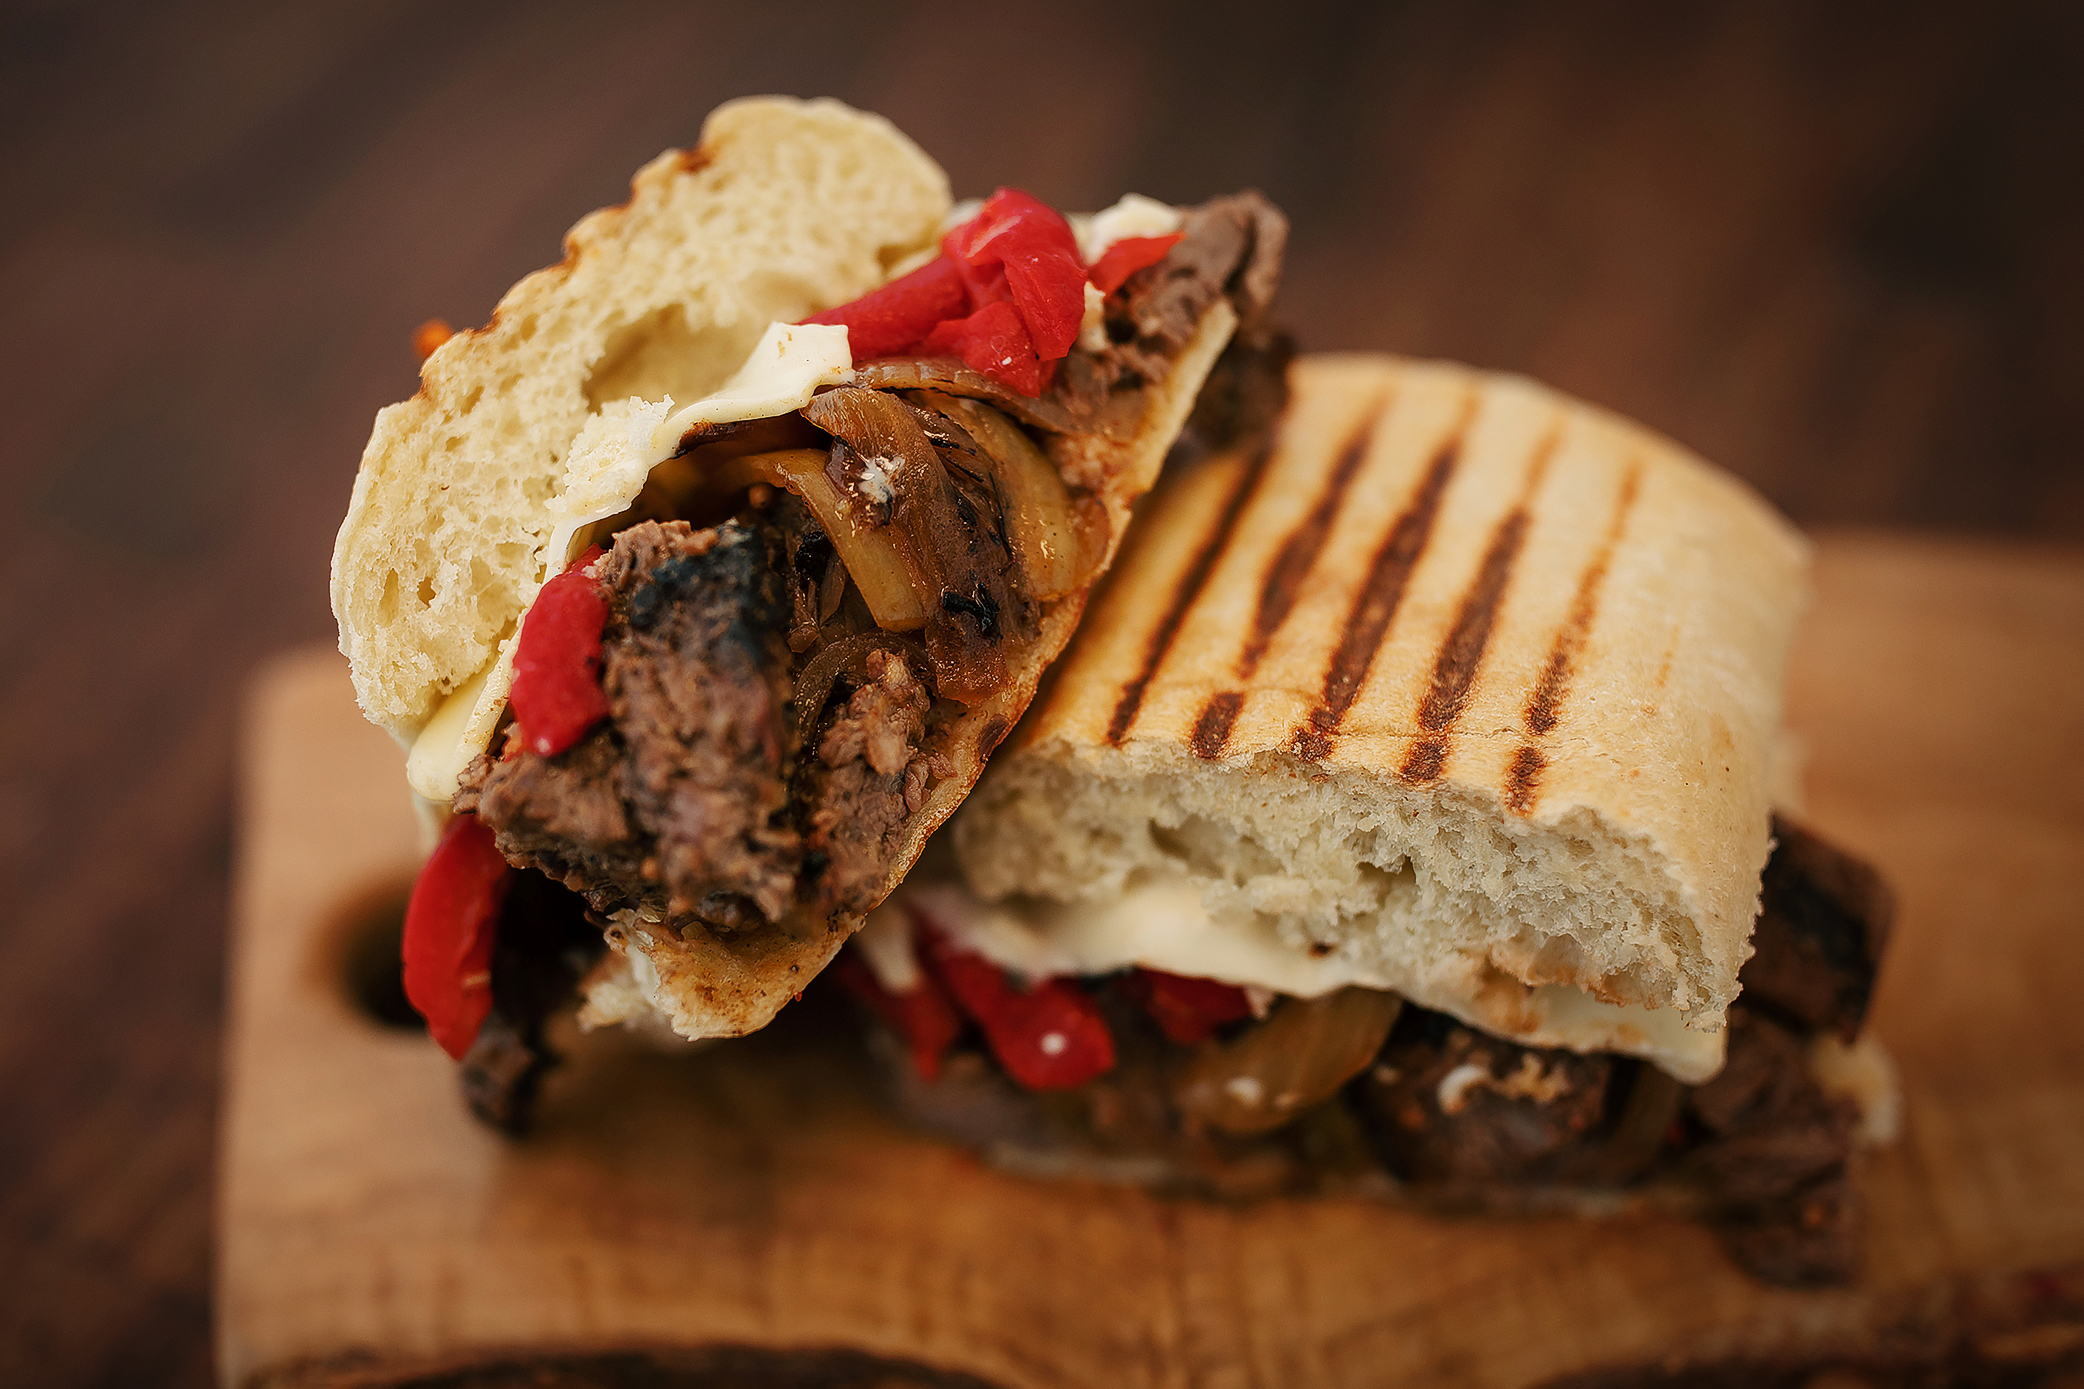 Steak & Cheese with our Signature Steak Tips, Onions & Peppers